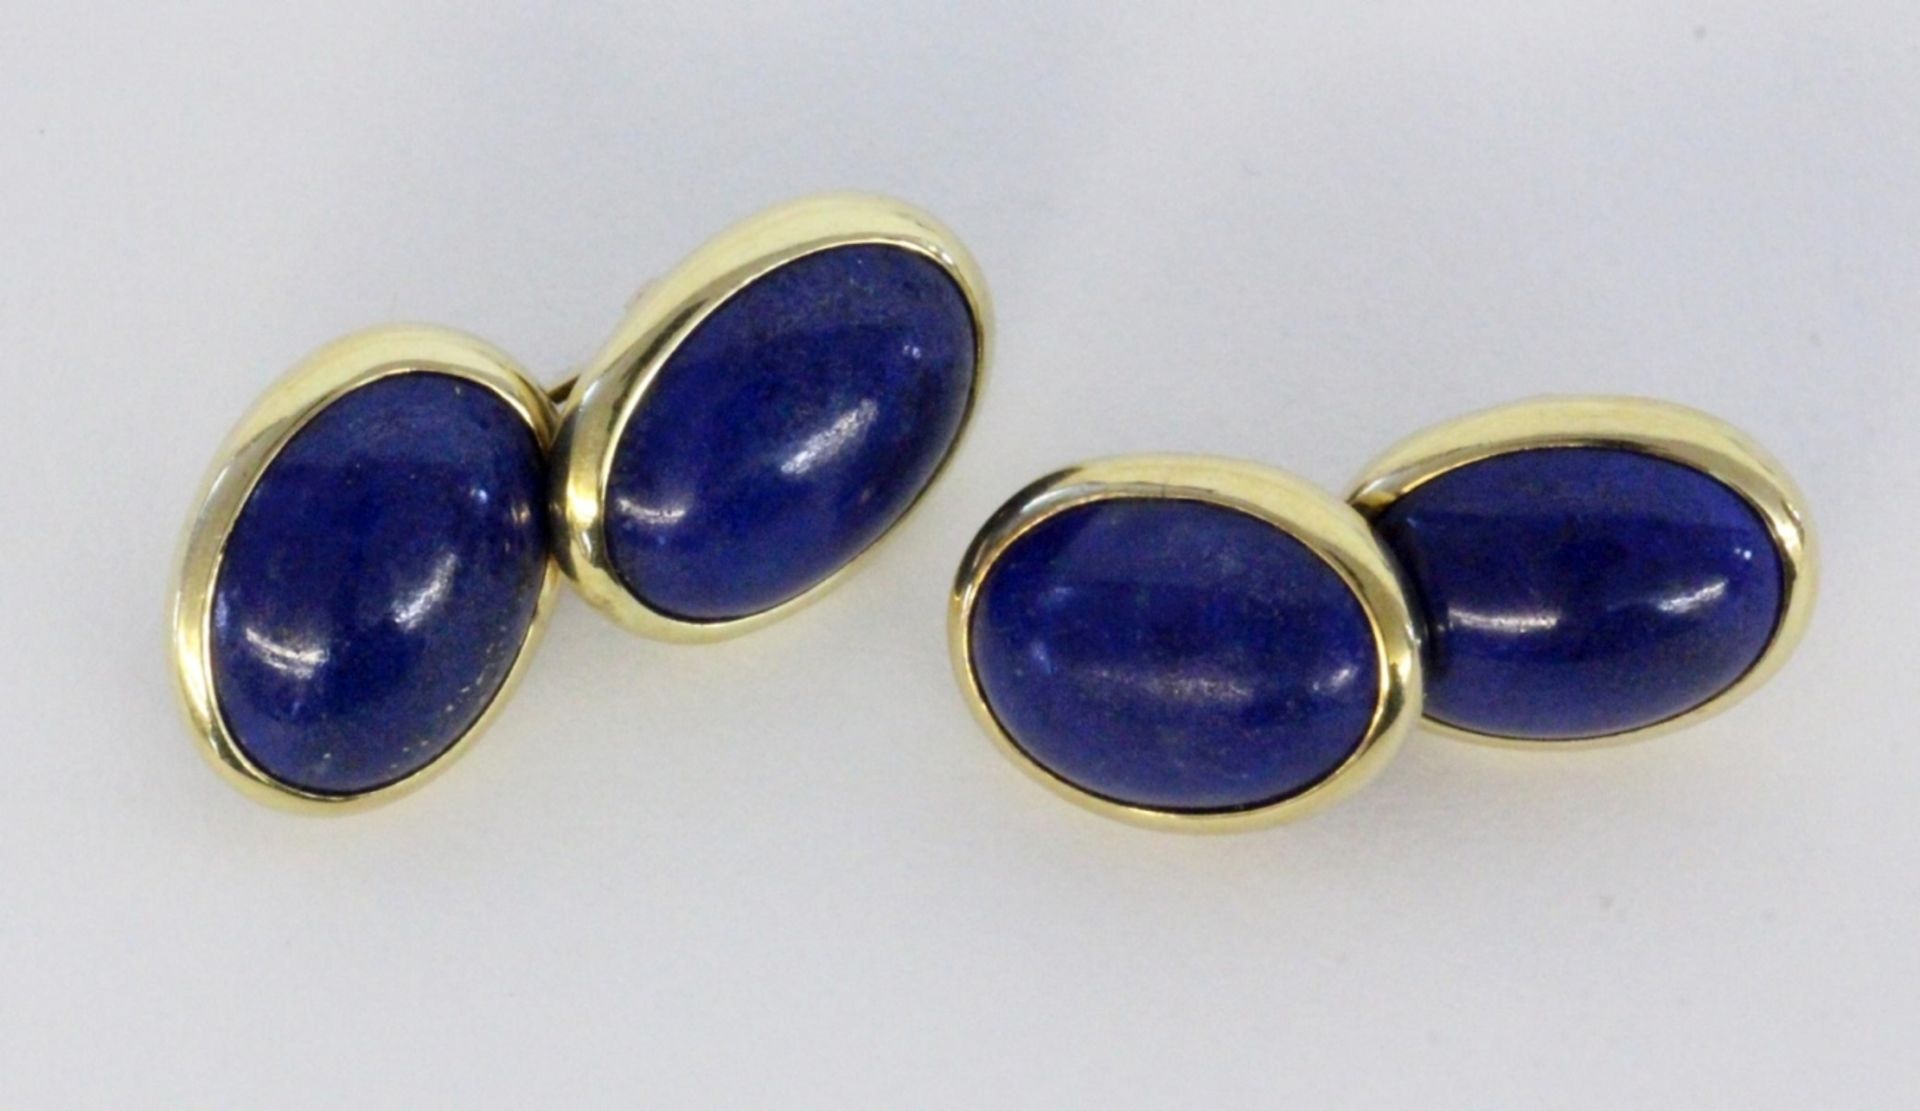 A PAIR OF CUFFLINKS 585/000 yellow gold with lapis lazuli. Gross weight approximately 8.8